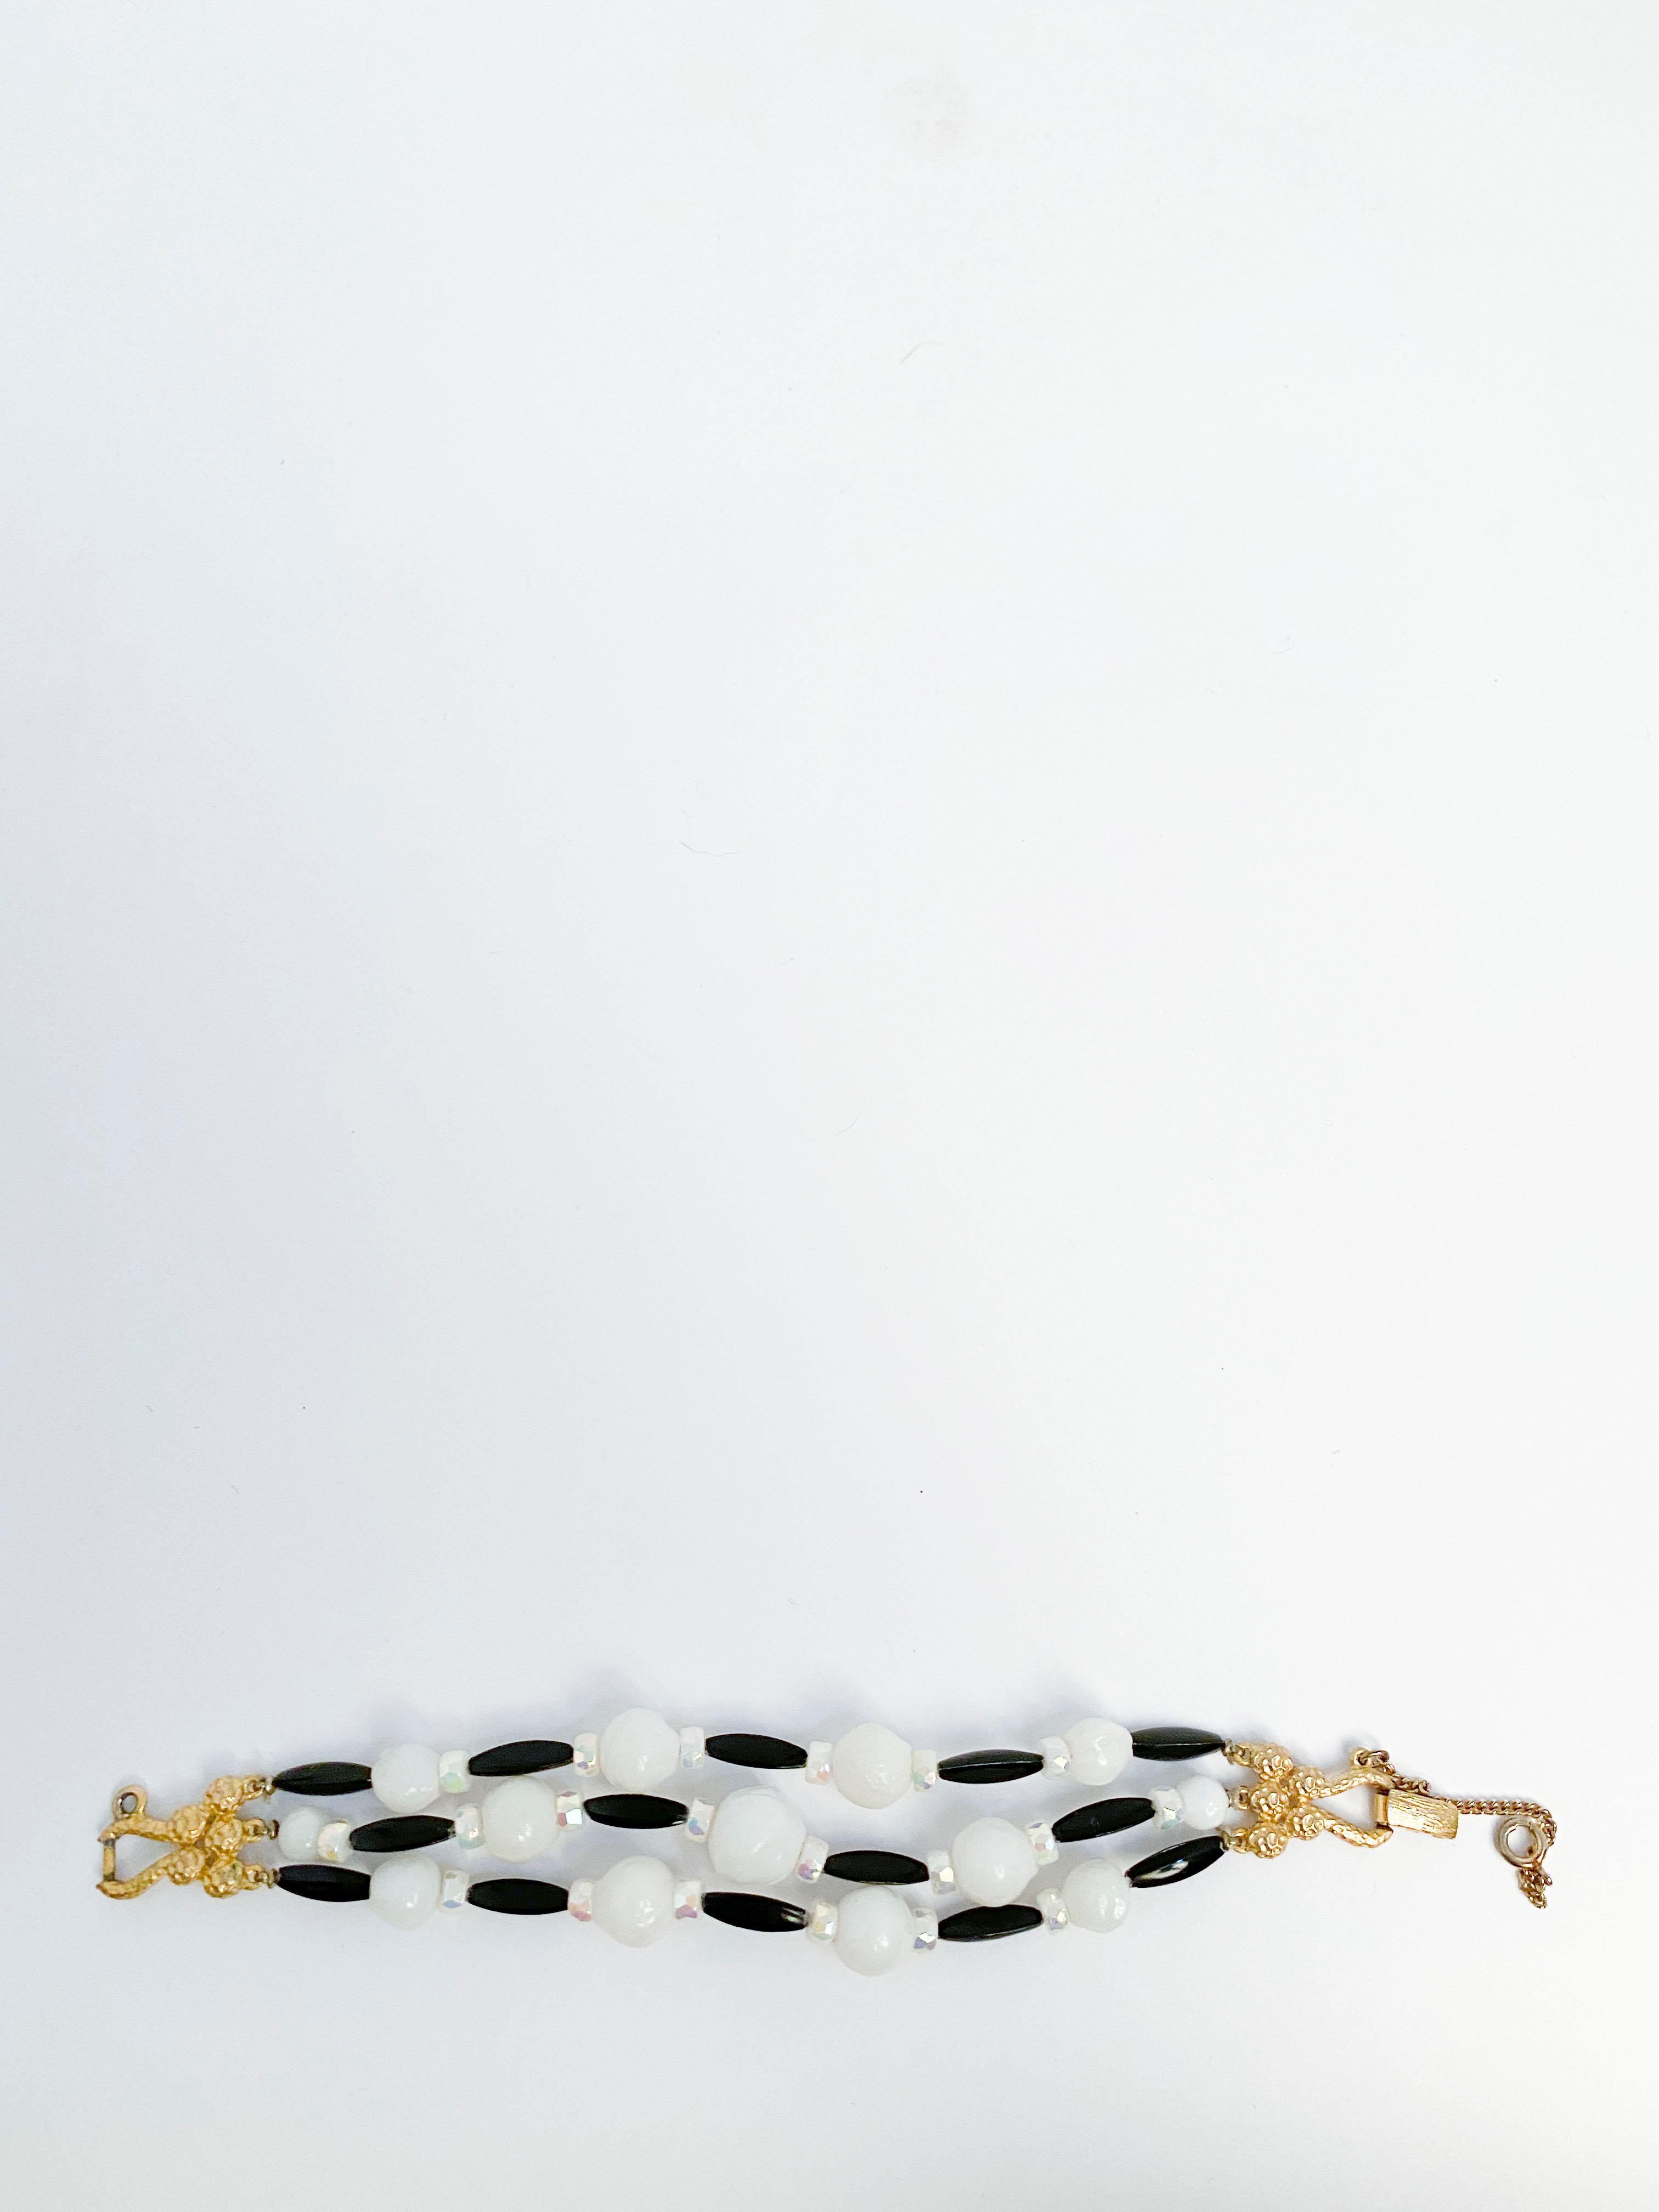 1960s Schiaparelli Lucite beaded bracelet with tress strands of black white and opaque pearlesent beads. Finished with a gold tone clasp and safety chain